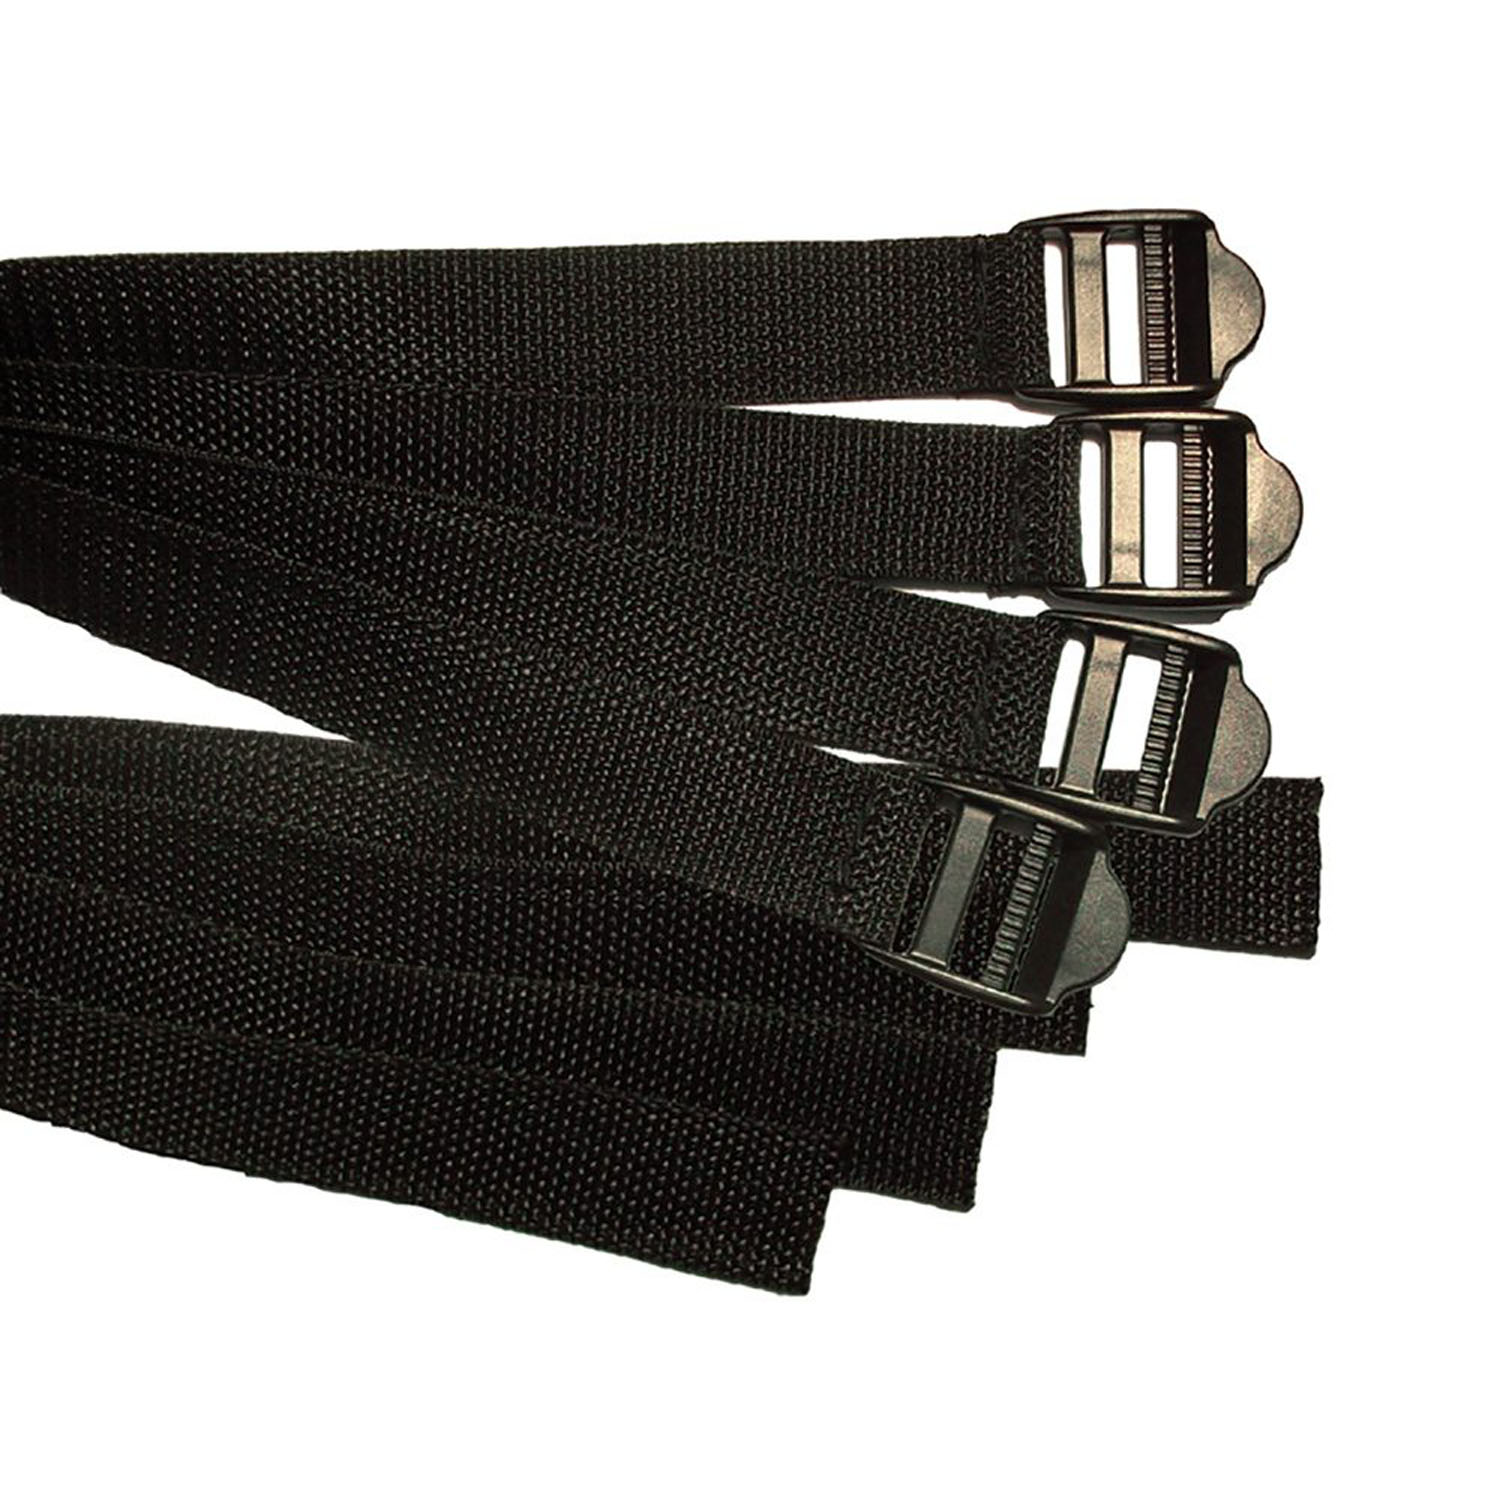 PAIR OF STRAPS FOR METATARSAL FOOT PROTECTOR